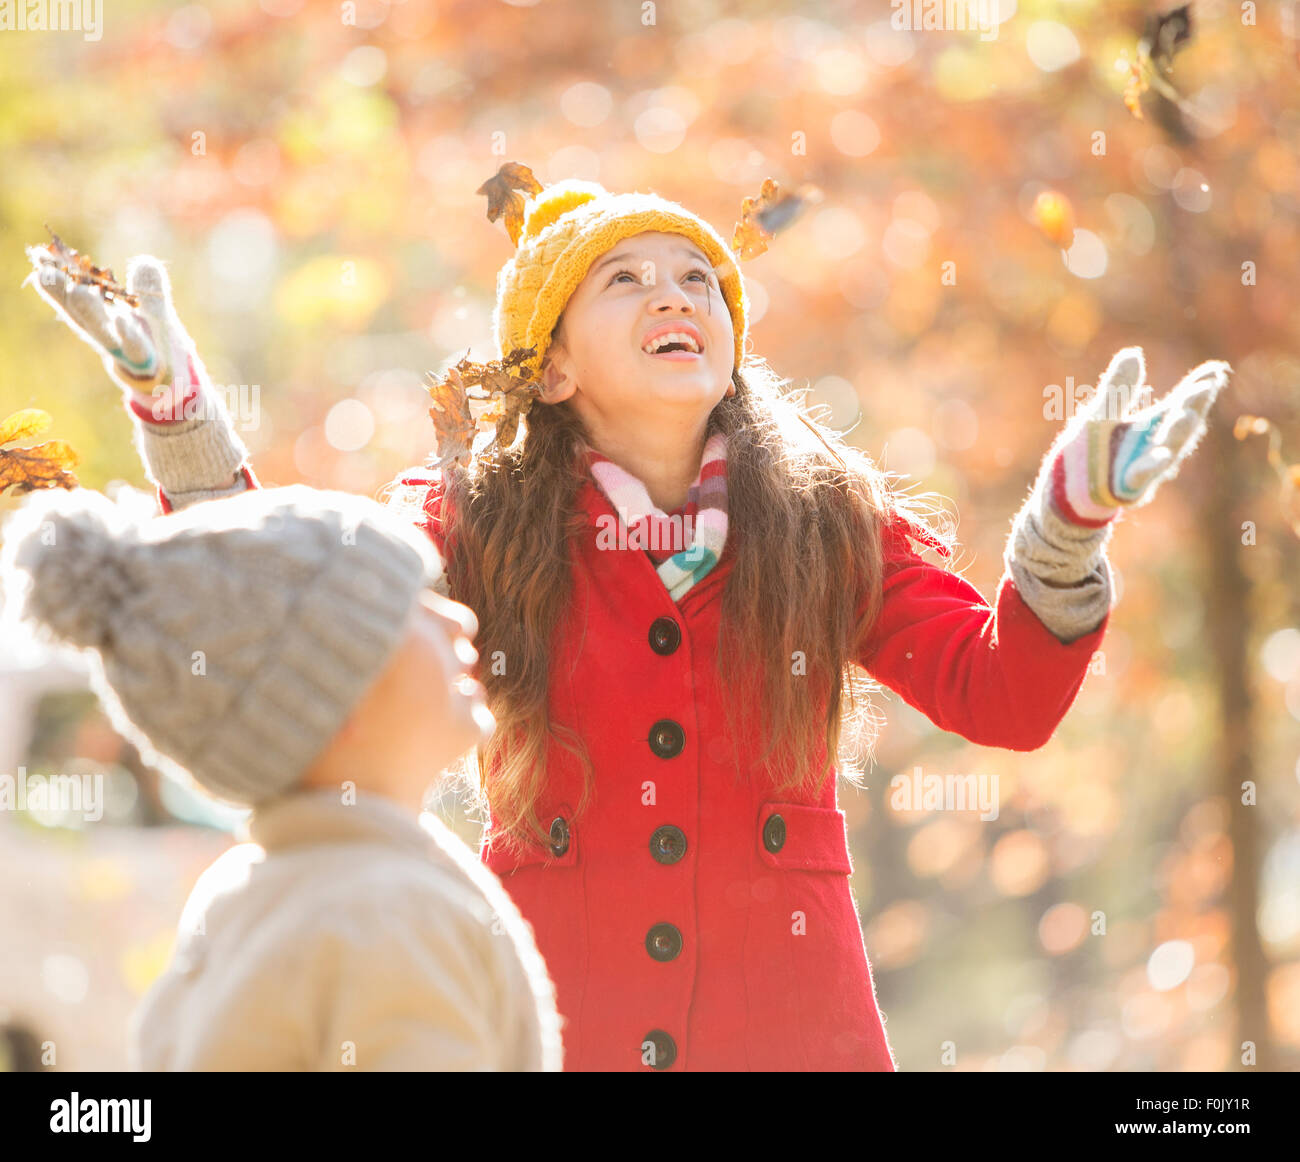 Girl throwing autumn leaves Stock Photo